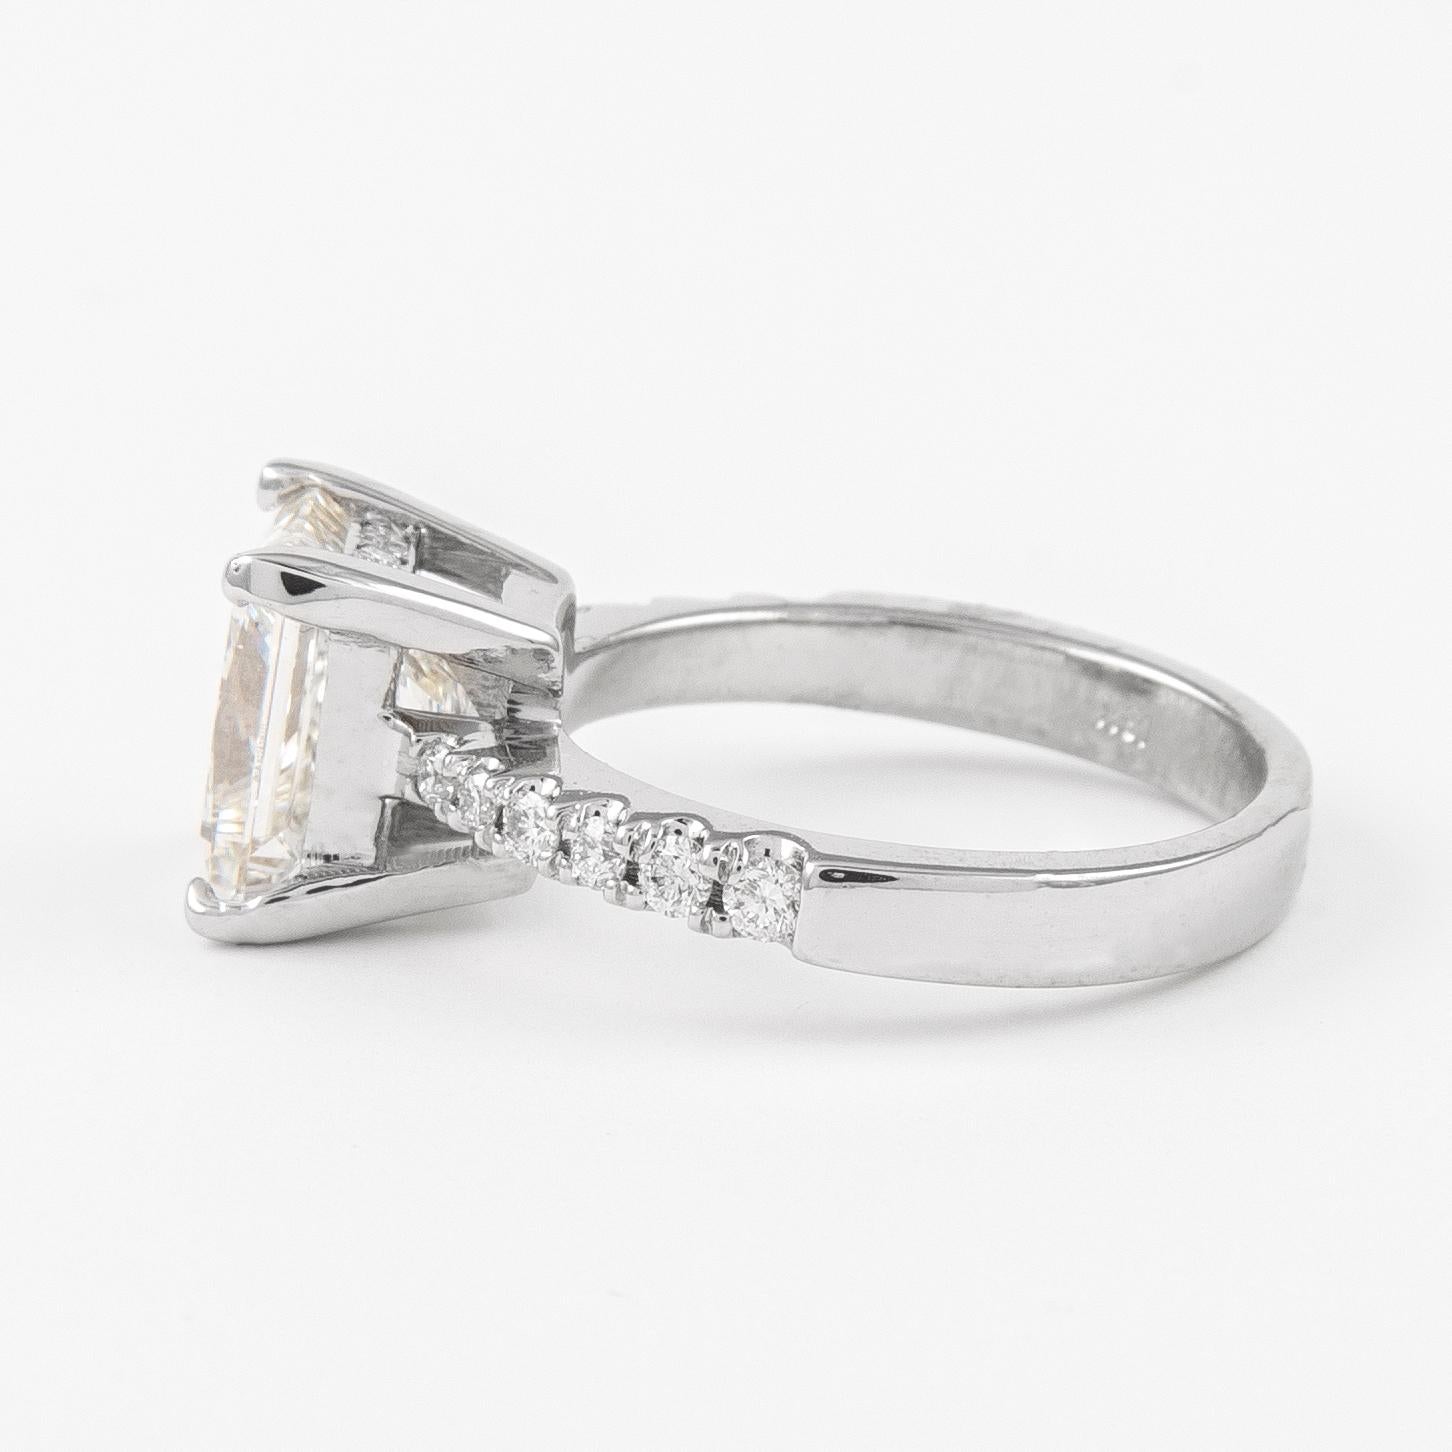 Alexander GIA 3.01 Carat Princess Cut Diamond J VS1 Engagement Ring White Gold In New Condition For Sale In BEVERLY HILLS, CA